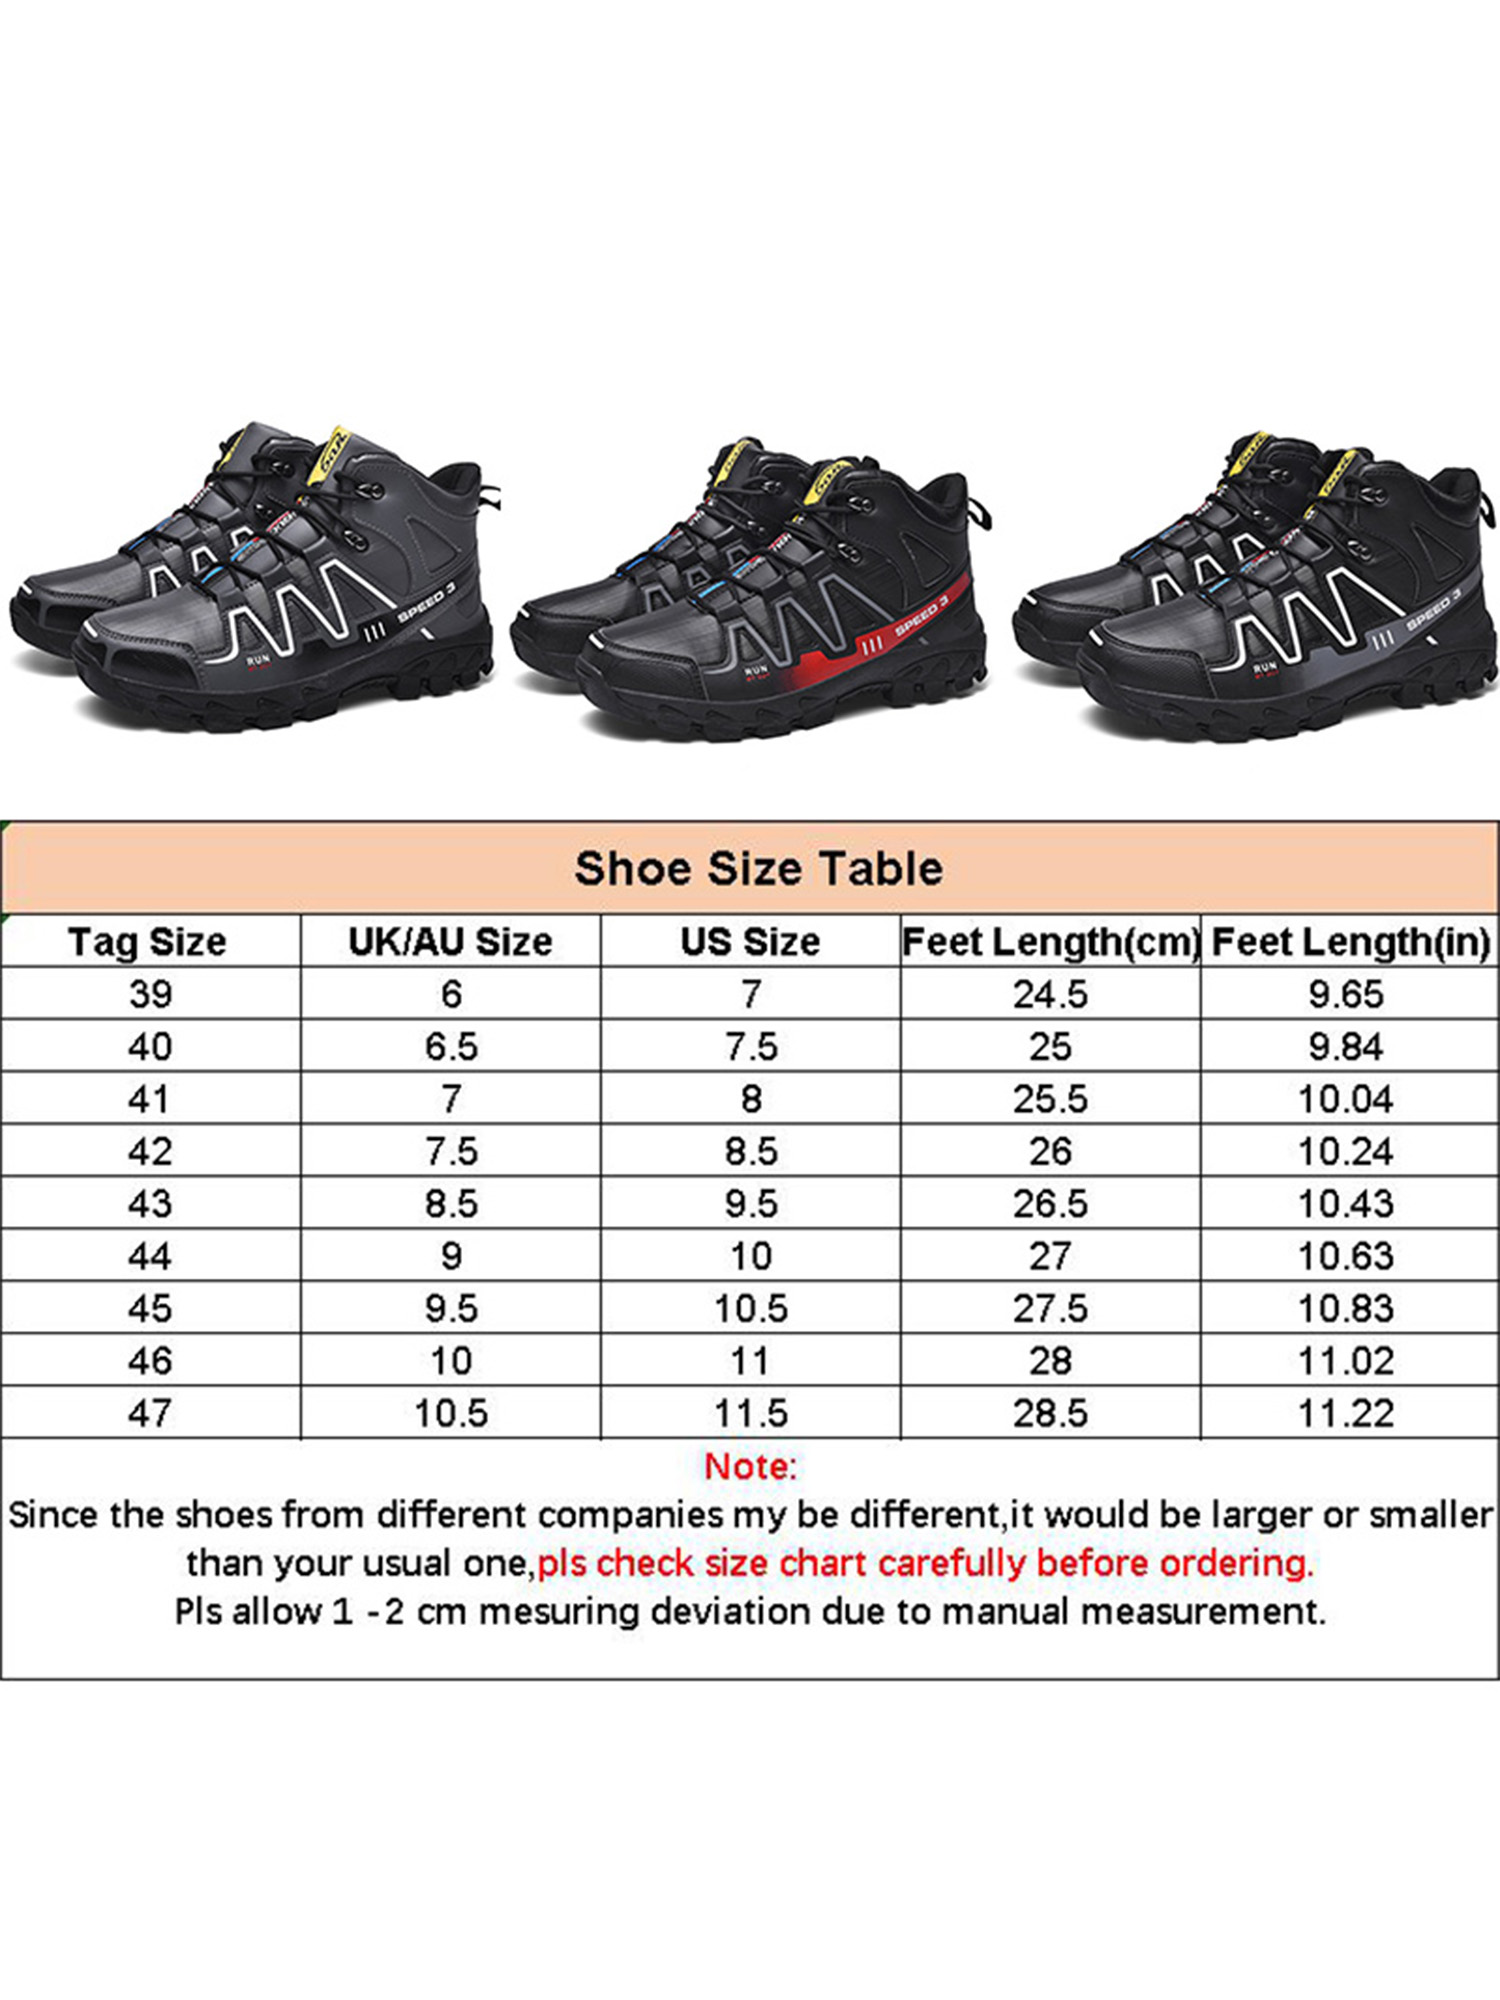 Avamo Steel Toe Sneakers for Men Waterproof Safety Shoes Slip Resistant Work Sneaker Breathable Puncture Proof Shoes-High Tops - image 2 of 10